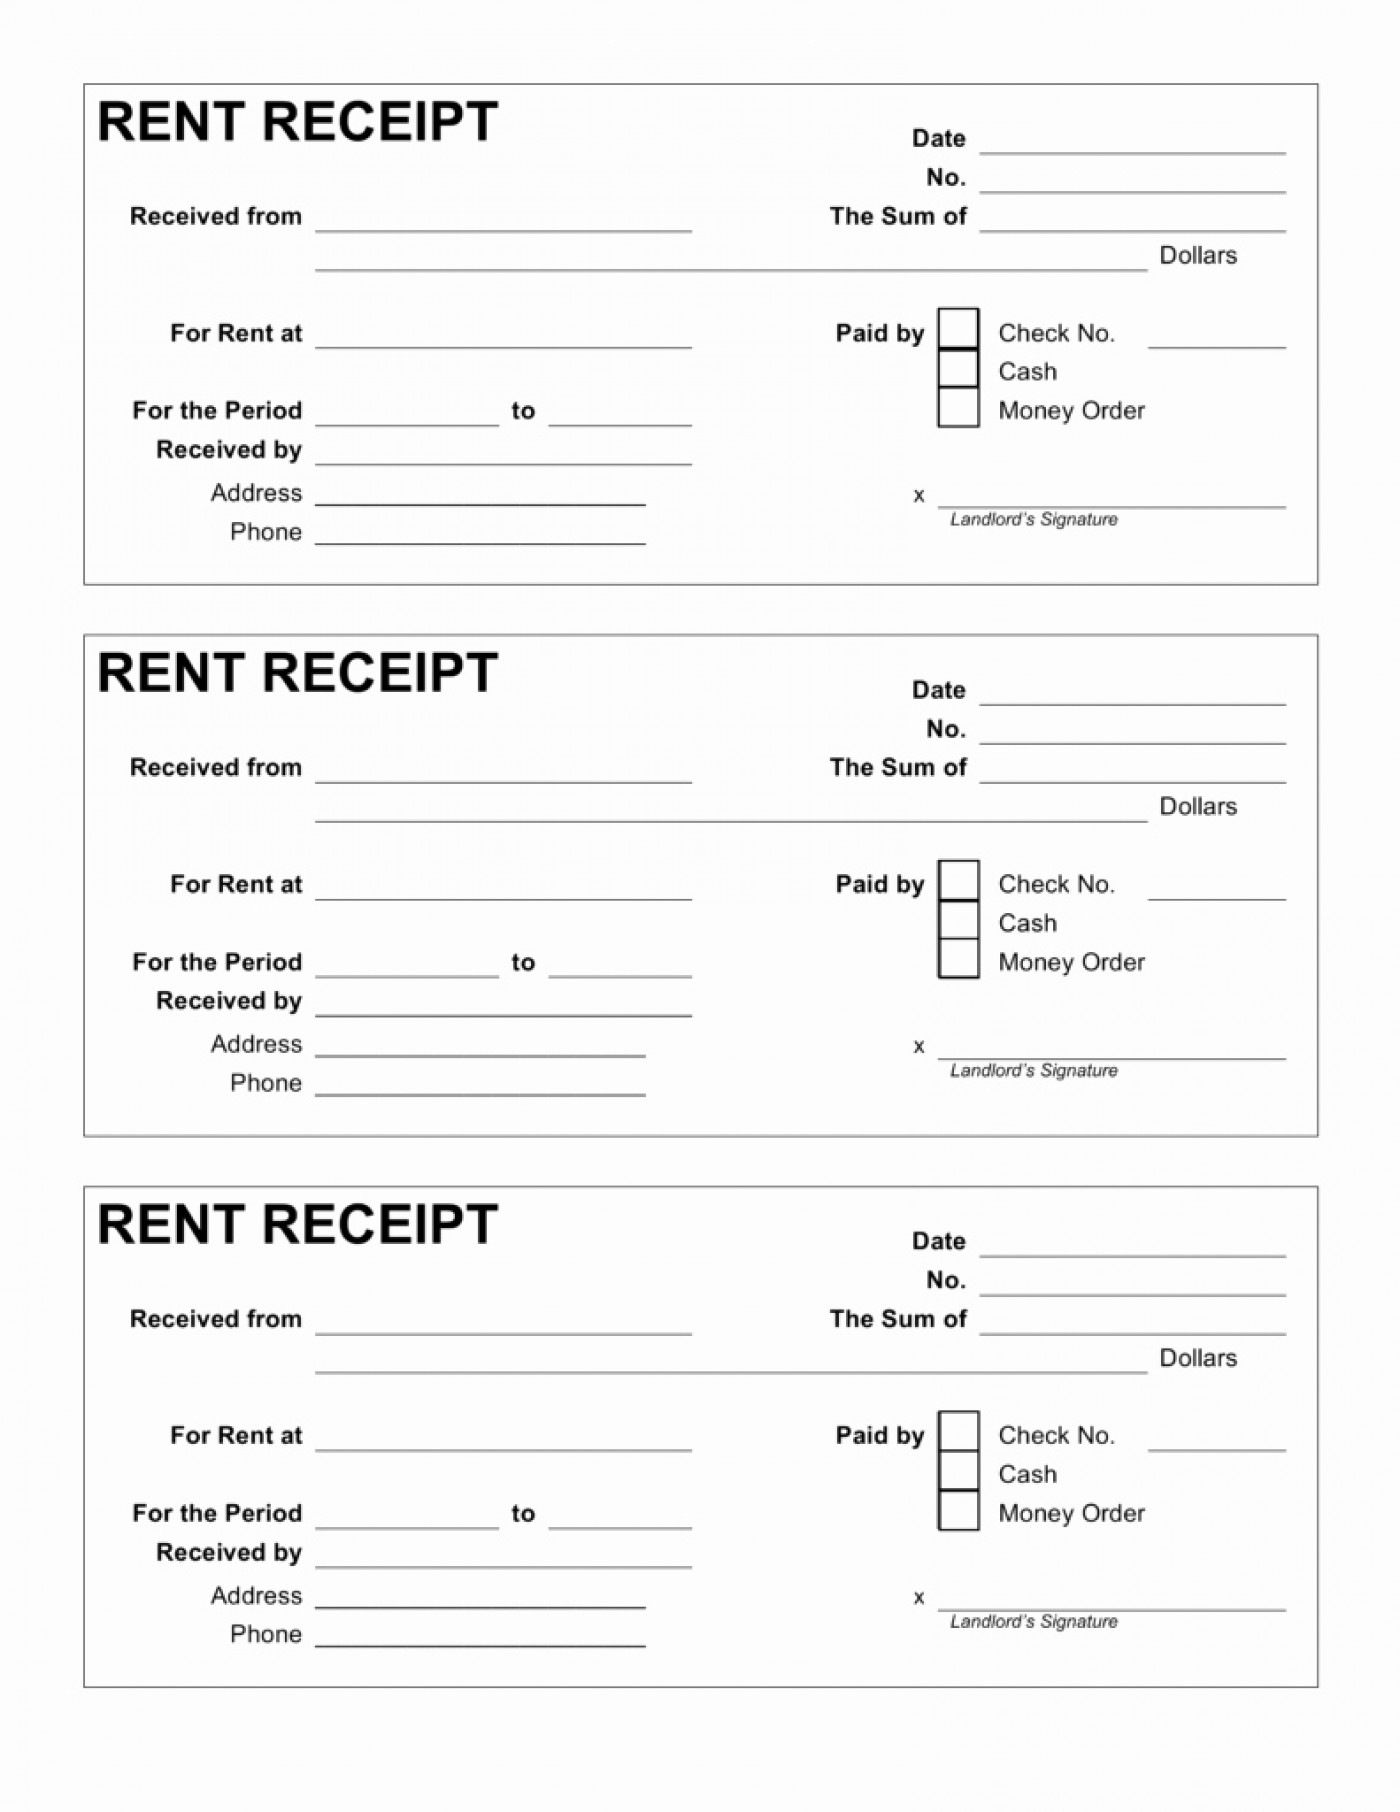 023 Template Ideas Free Printable Receipt Best Of Landlord Rent - Free Printable Rent Receipt